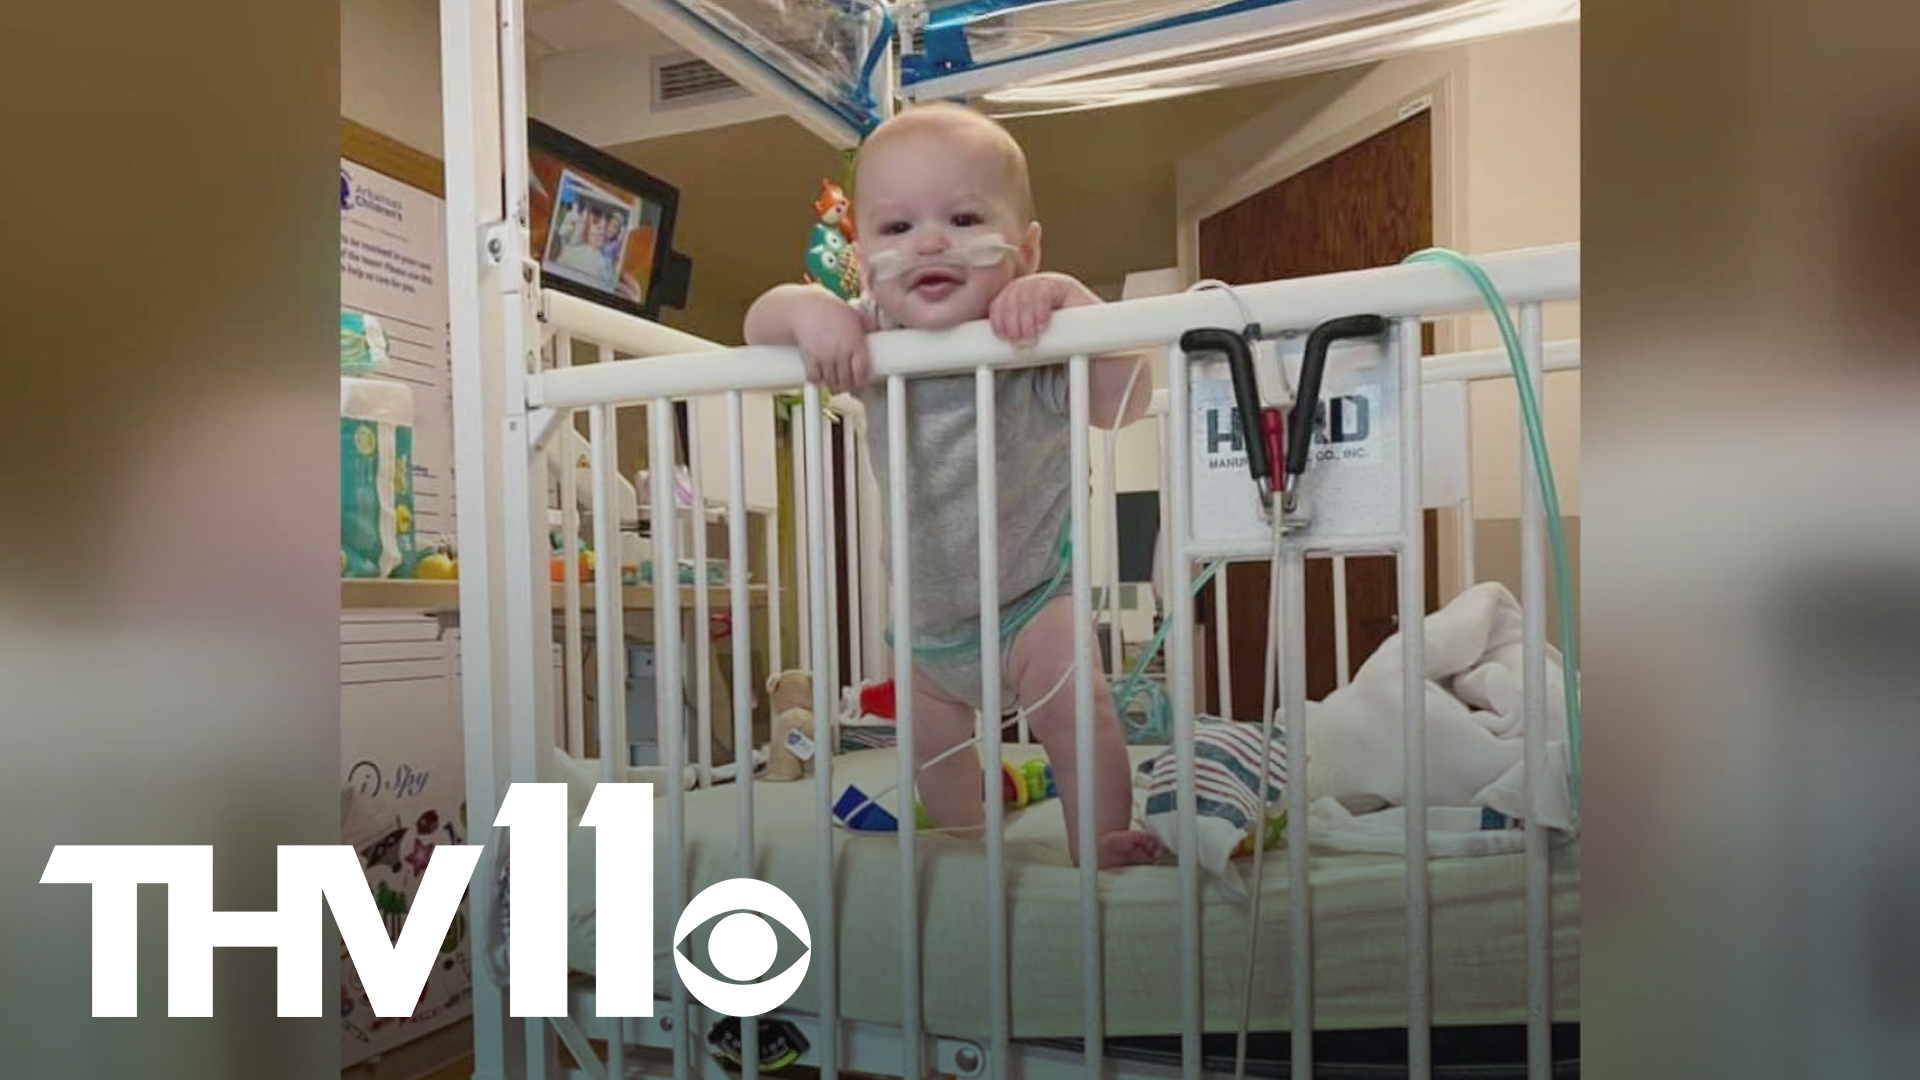 We spoke to a mother who experience RSV first hand with her 7-month-old child. Cases continues to rise in Arkansas, which is unusual in the summer.